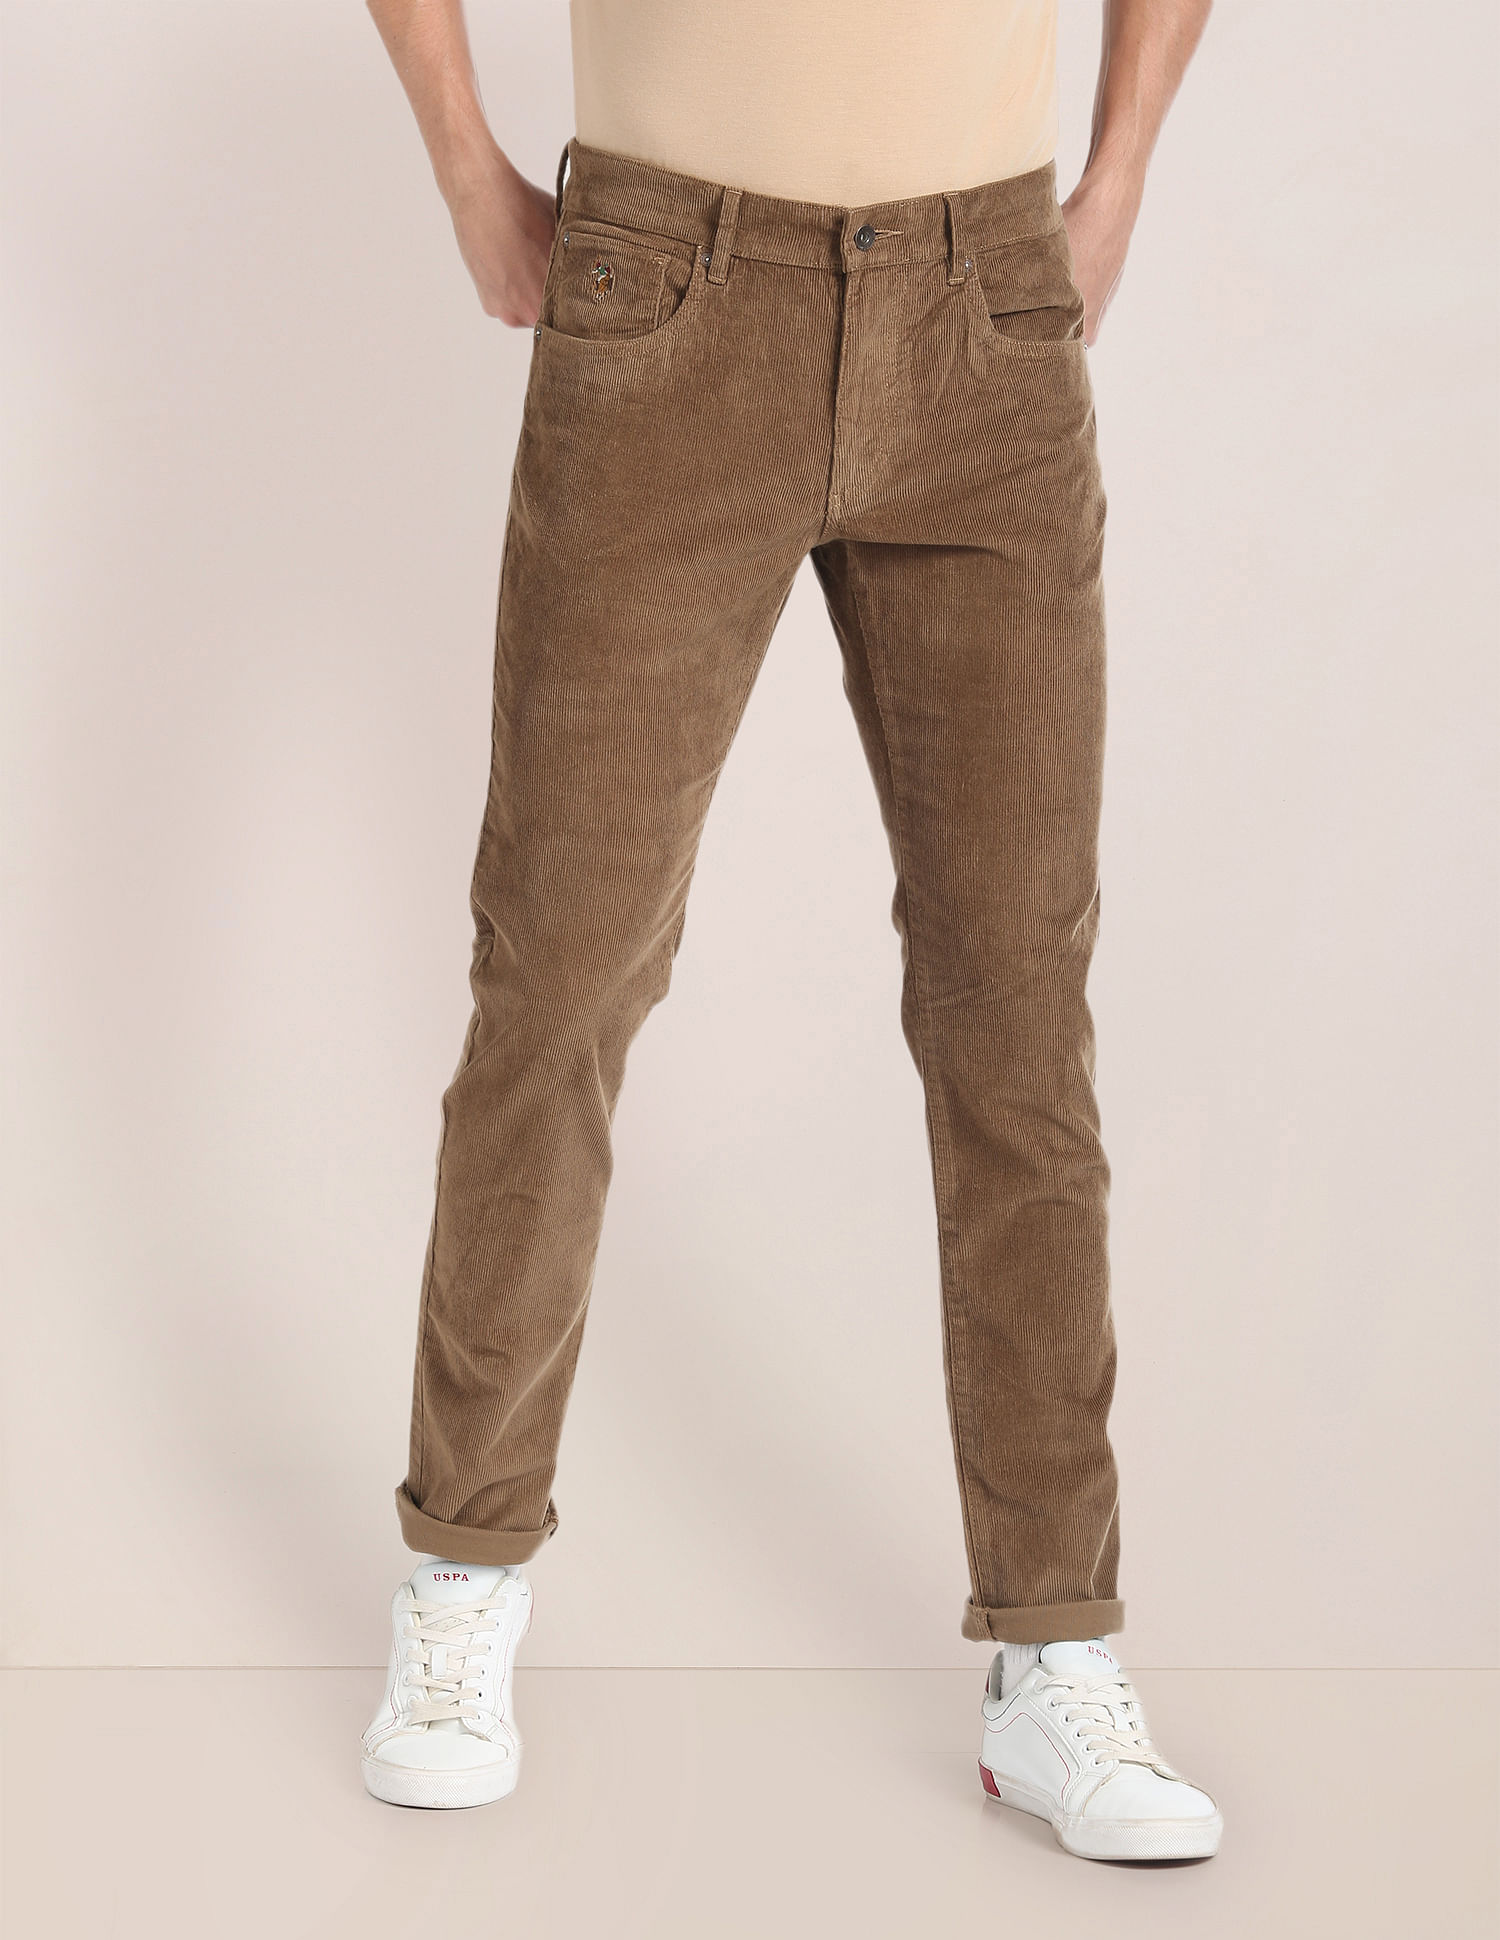 Buy COVER STORY Brown Corduroy Flared Trousers online